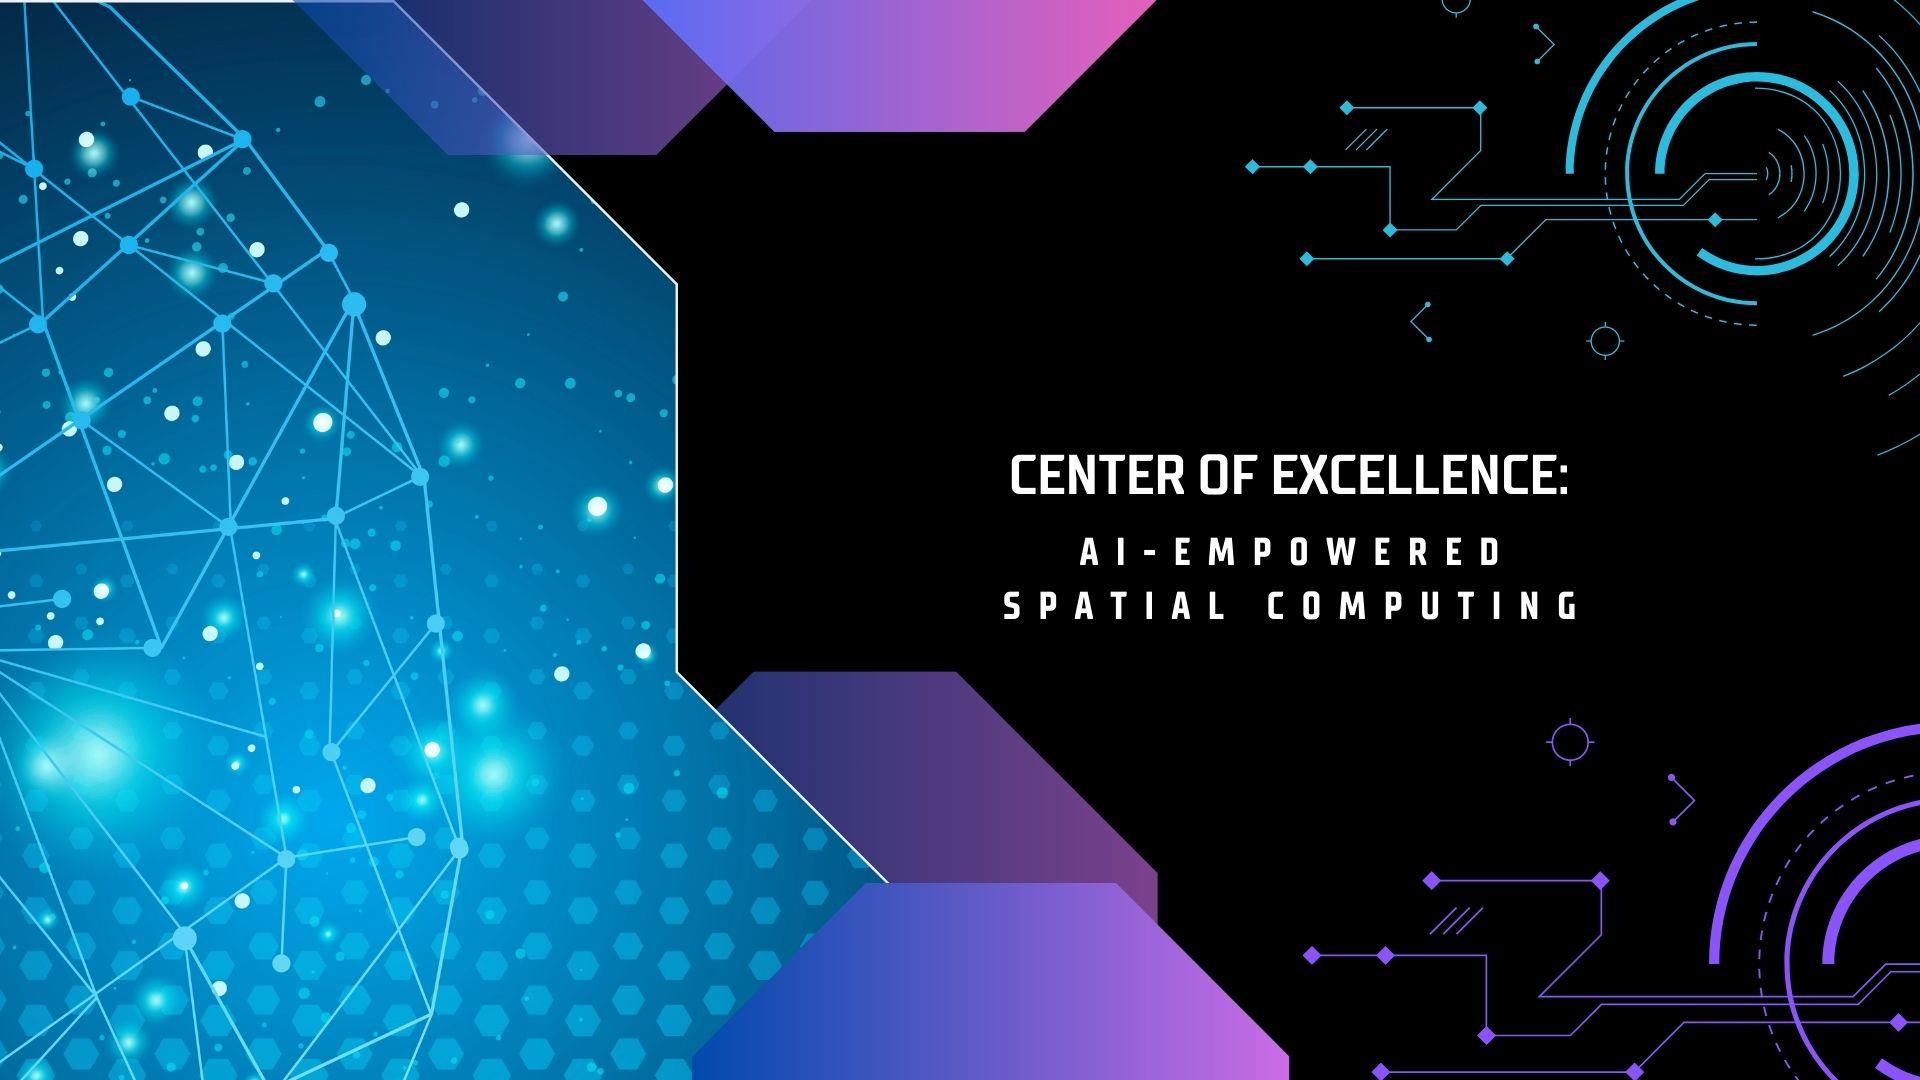 Center of excellence: AI-empowered spatial computing